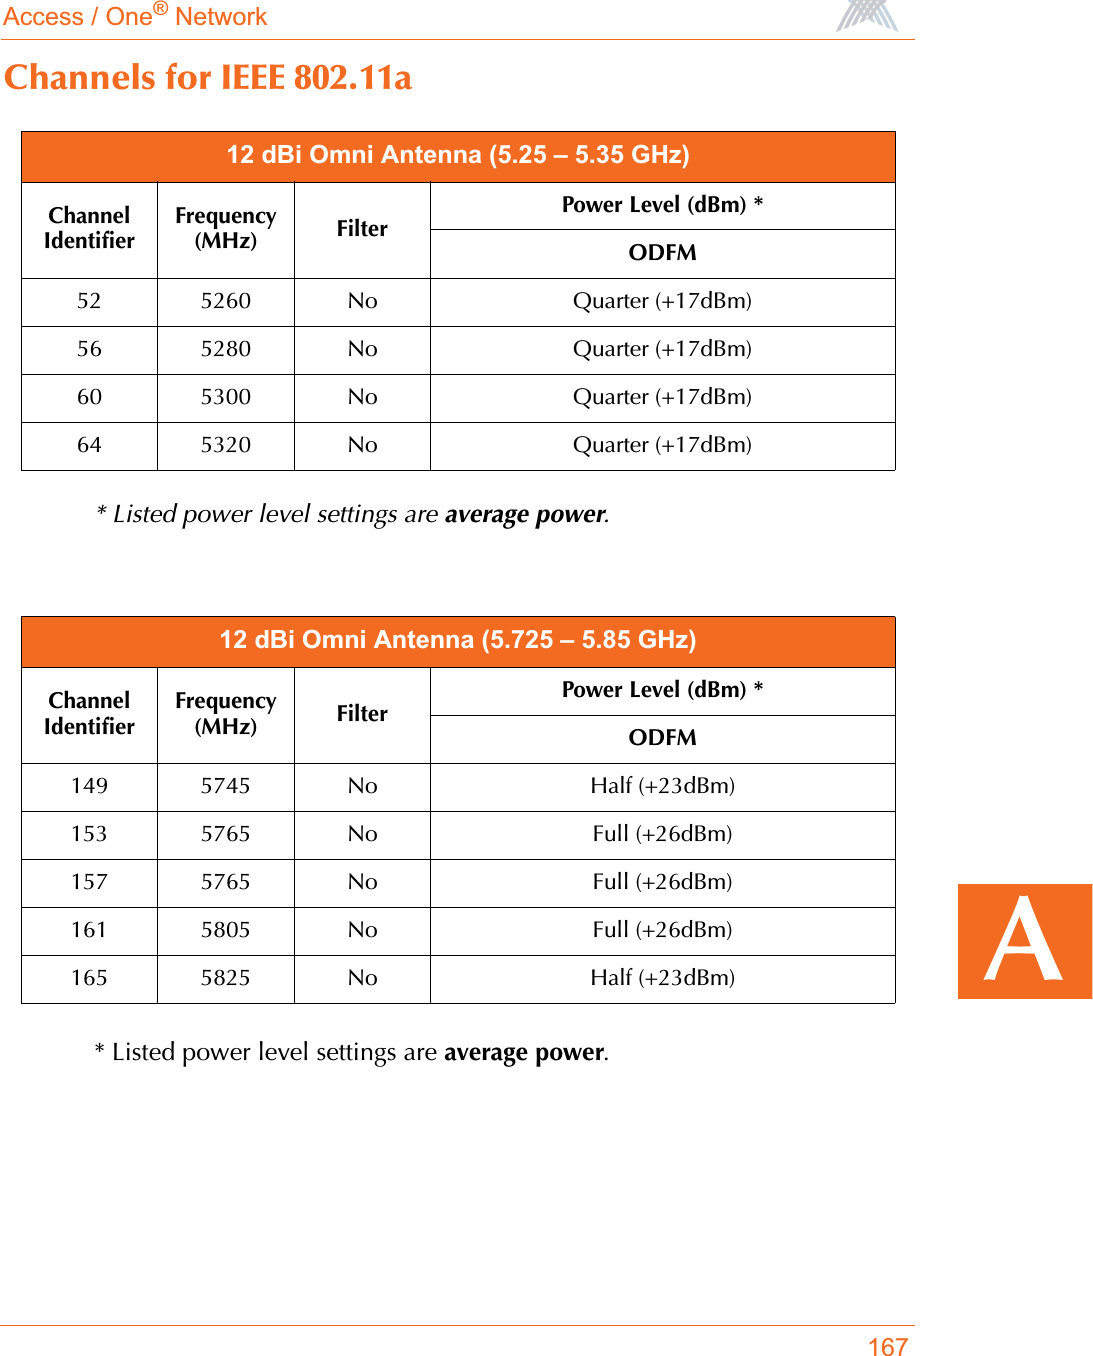 Access / One® Network167AChannels for IEEE 802.11a* Listed power level settings are average power.* Listed power level settings are average power.12 dBi Omni Antenna (5.25 – 5.35 GHz)ChannelIdentifierFrequency (MHz) FilterPower Level (dBm) *ODFM52 5260 No Quarter (+17dBm)56 5280 No Quarter (+17dBm)60 5300 No Quarter (+17dBm)64 5320 No Quarter (+17dBm)12 dBi Omni Antenna (5.725 – 5.85 GHz)ChannelIdentifierFrequency (MHz) FilterPower Level (dBm) *ODFM149 5745 No Half (+23dBm)153 5765 No Full (+26dBm)157 5765 No Full (+26dBm)161 5805 No Full (+26dBm)165 5825 No Half (+23dBm)